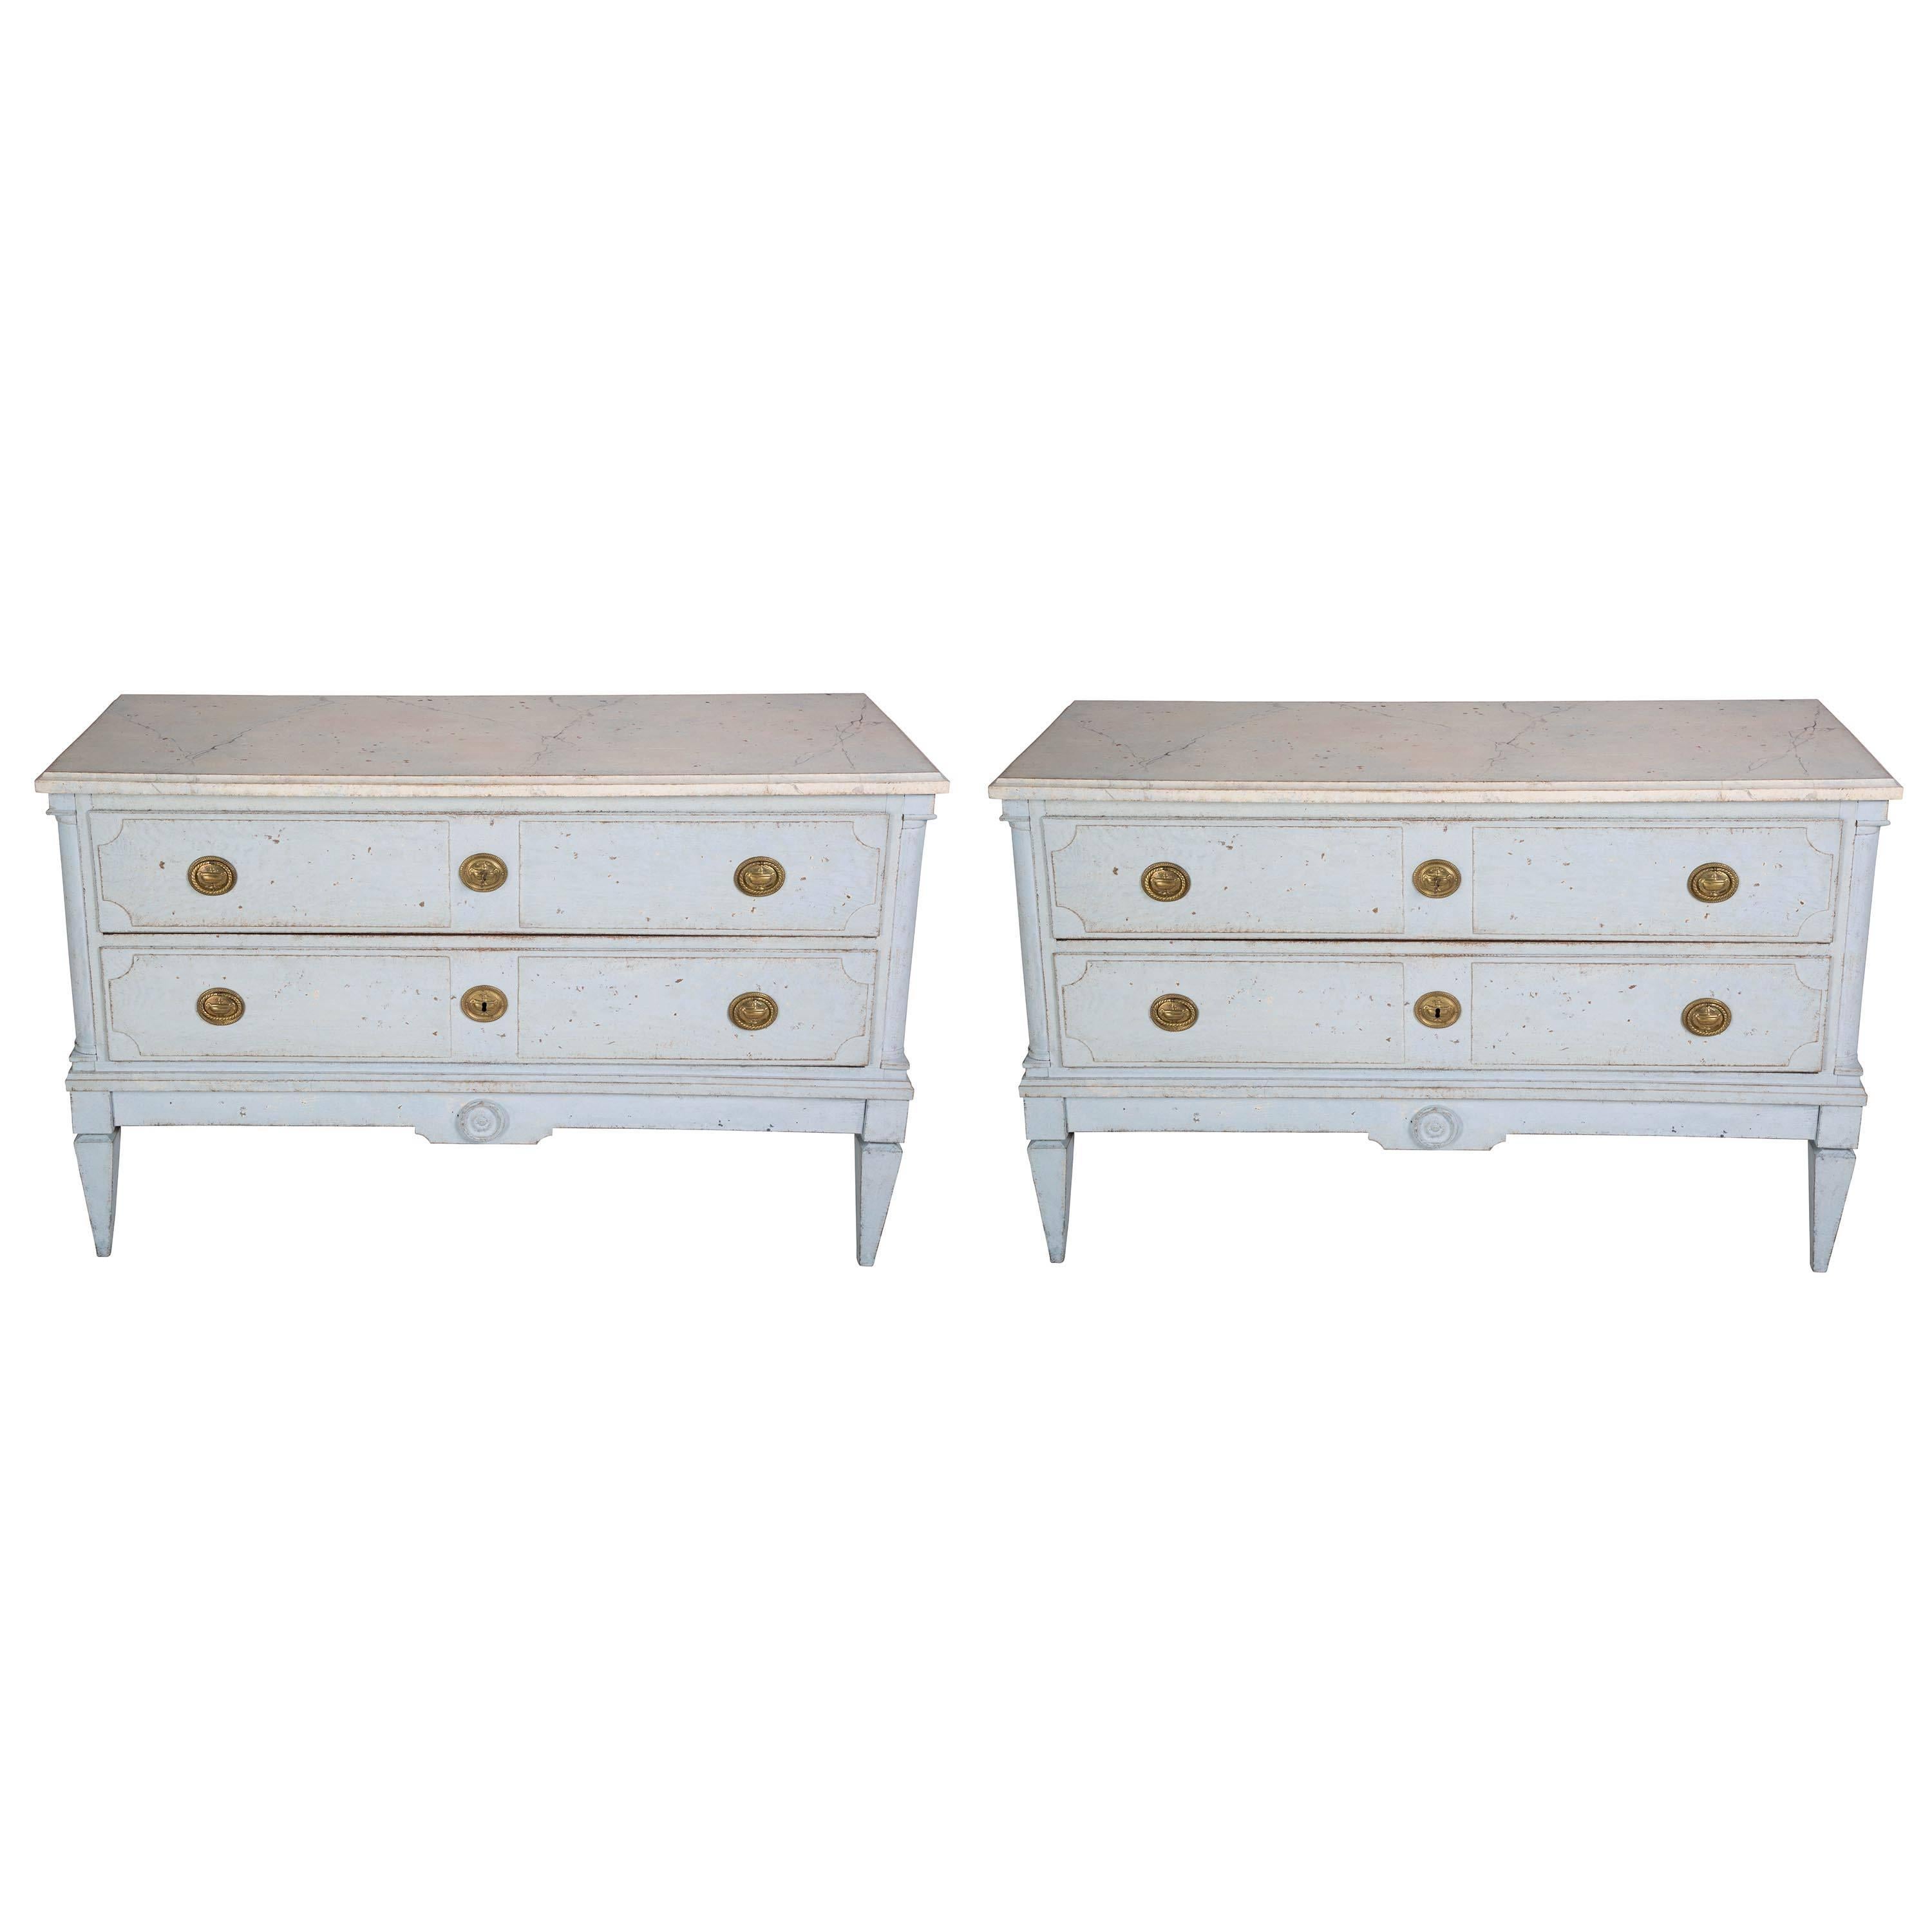 Pair of Gustavian Style painted commodes, late 20th century.